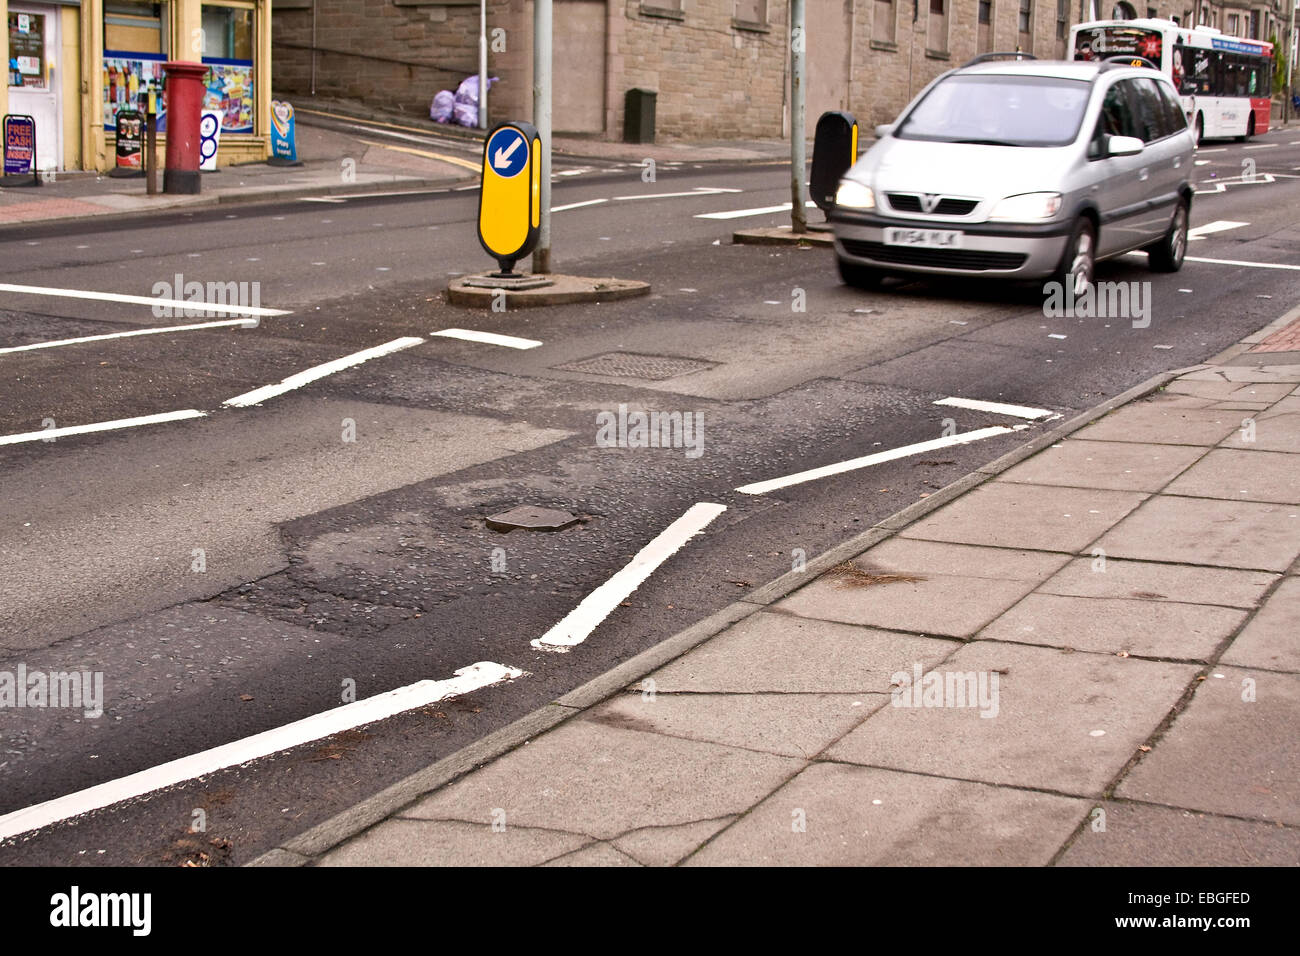 Dundee, Scotland, UK. 1st December, 2014. Councils are being invited to bid for a share of a £168 million Pothole Fund to repair local roads, making them safer and smoother for motorists, cyclists and other road users. Scottish roads are considered to be amongst the worst in the UK. Road surfaces are laid with cheap tarmac that crack with the high volume of traffic and bad weather. Credit:  Dundee Photographics/Alamy Live News Stock Photo